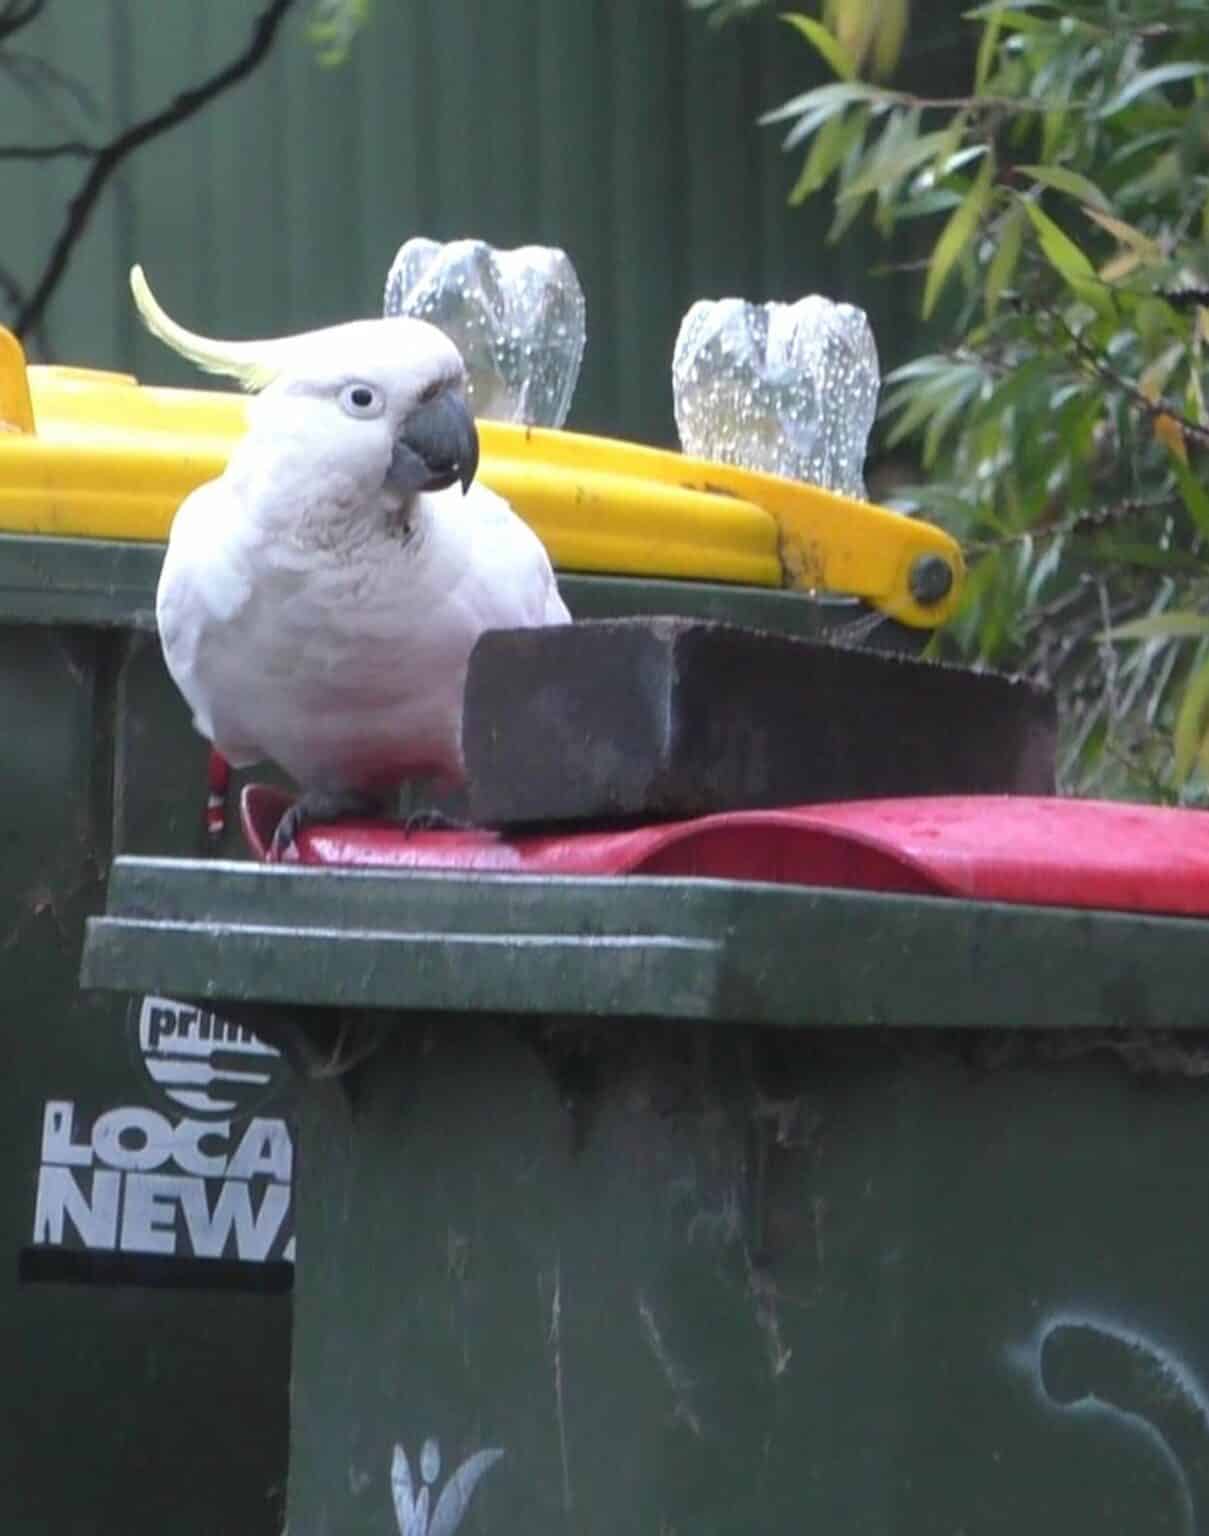 In Australia cockatoos have entered into an arms race with people for the right to access garbage